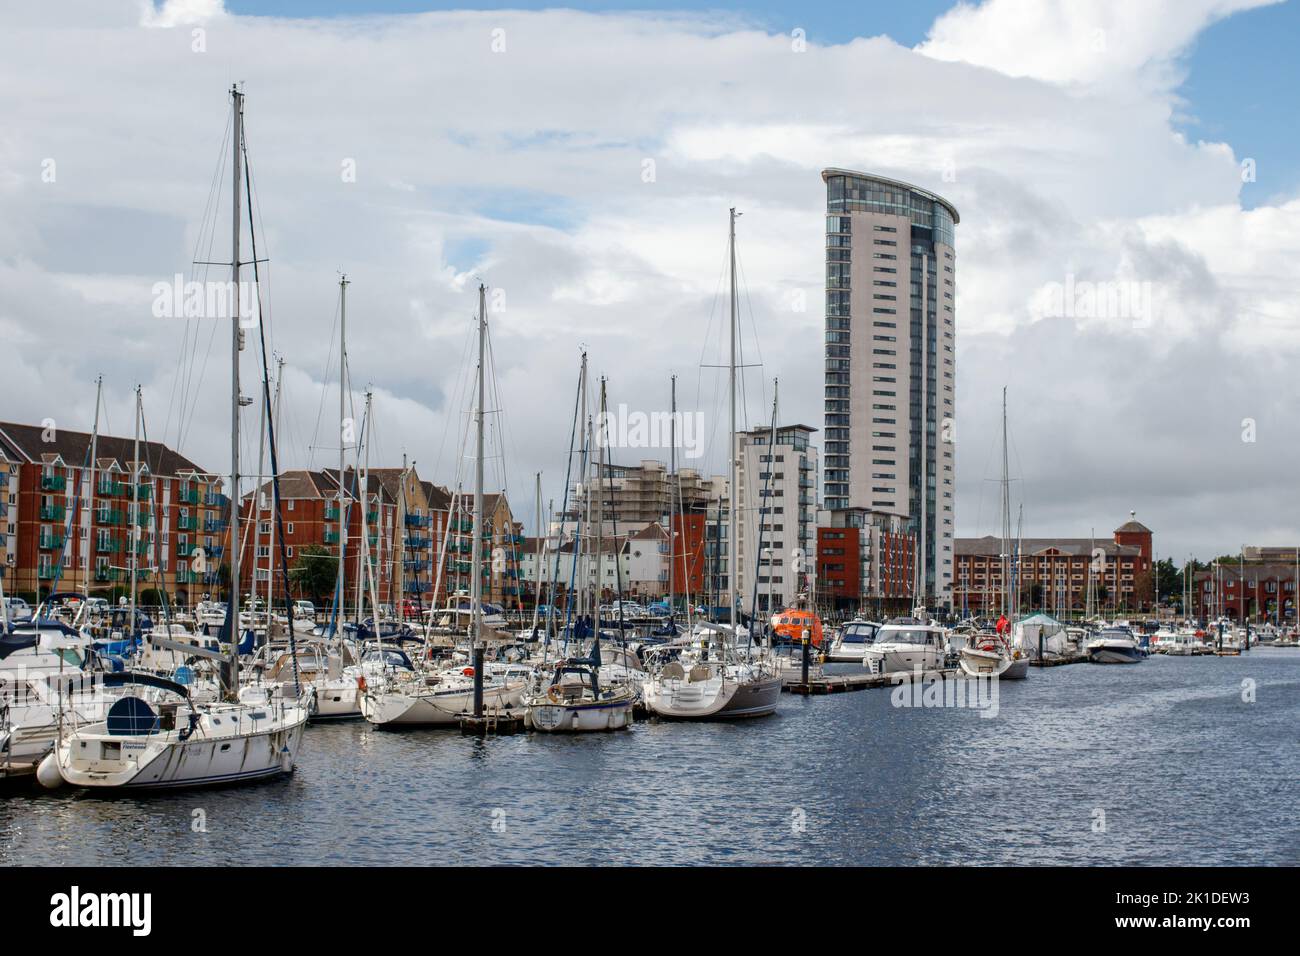 Boats and yachts in Swansea Basin. Stock Photo